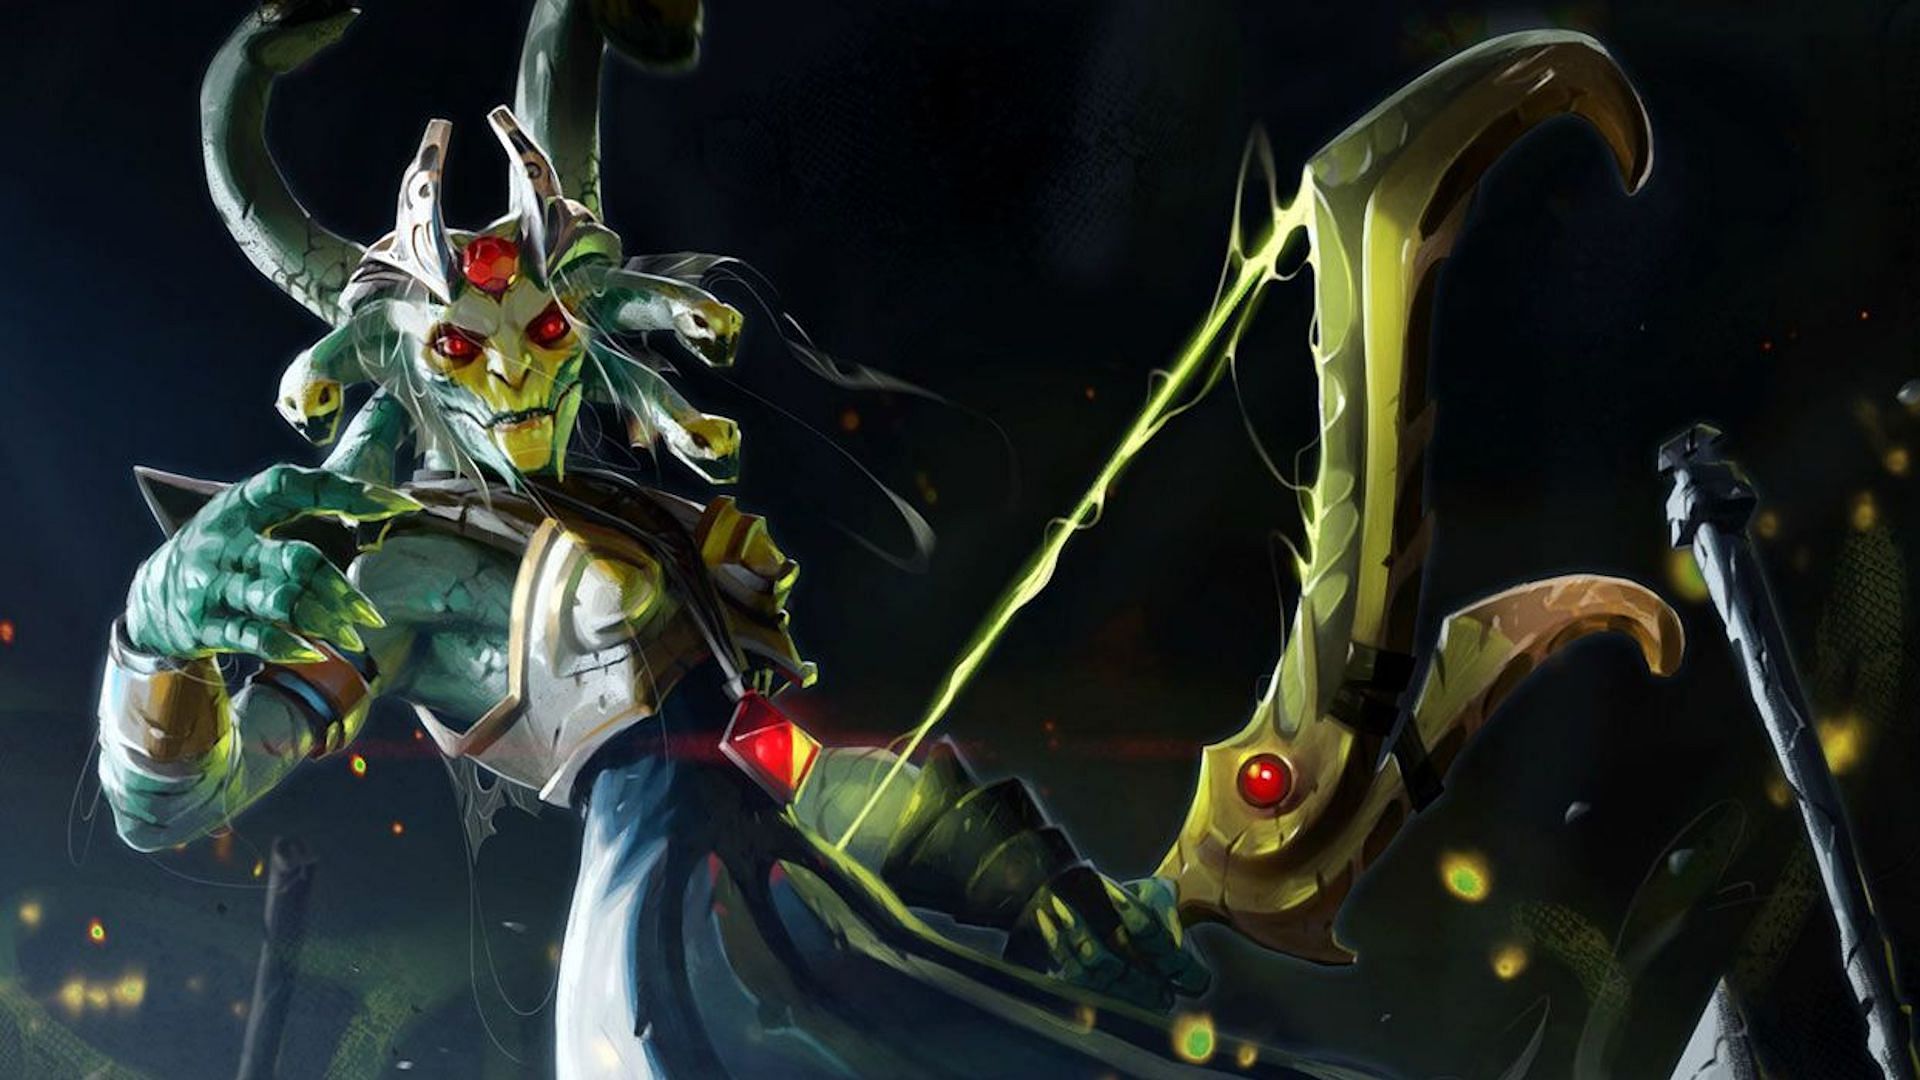 Without mana burn, Medusa is one of the most durable Dota 2 heroes (Image via Valve)